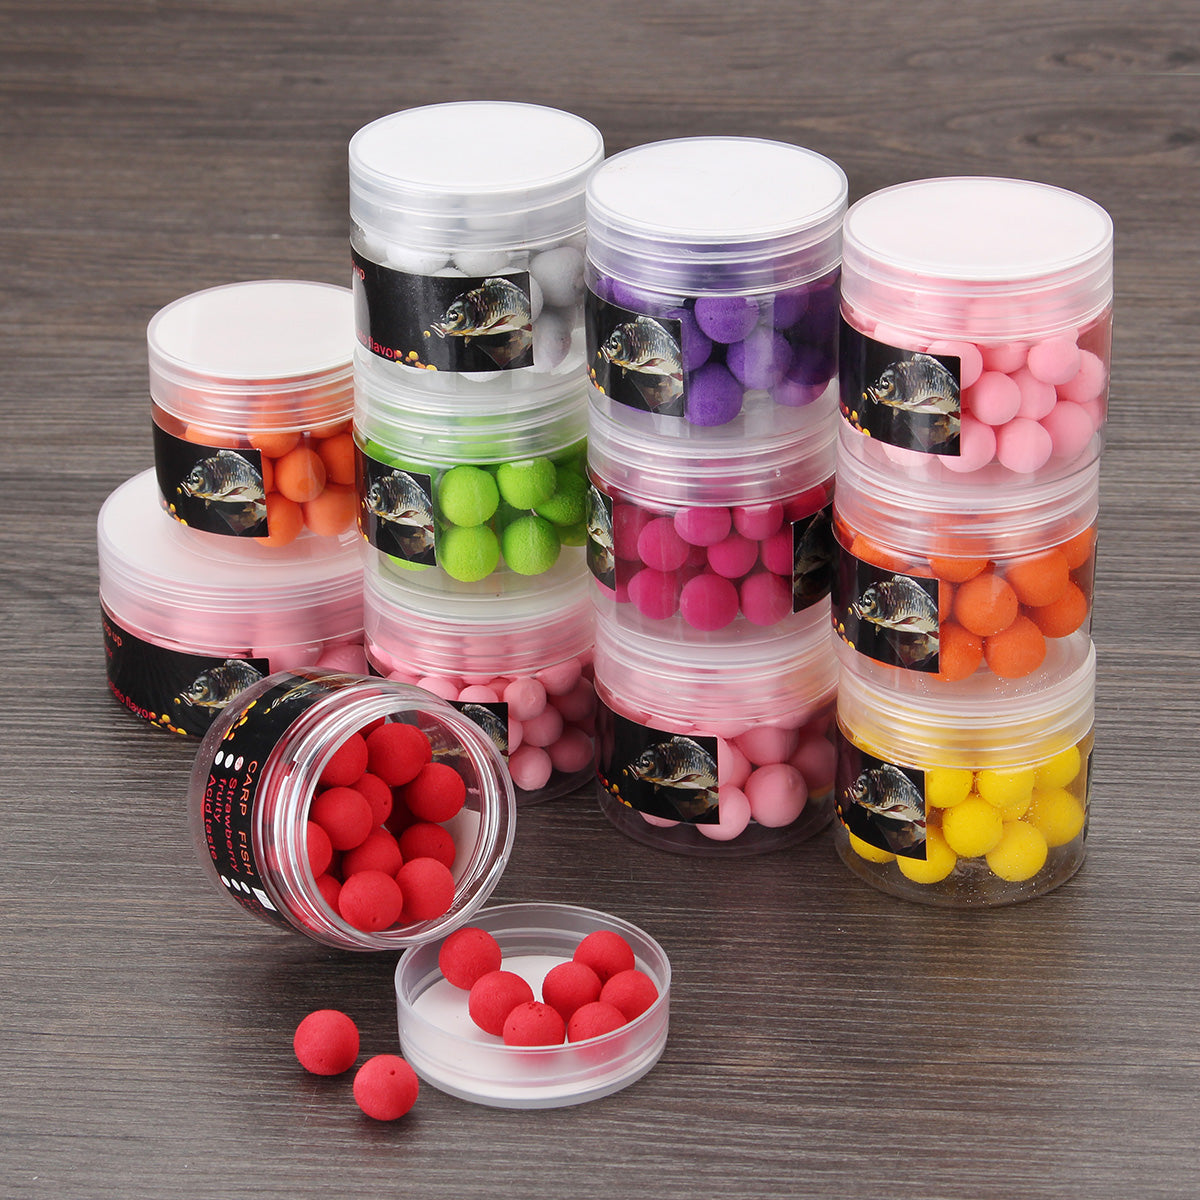 ZANLURE 8-14mm Course Carp Fishing Lures Pop Ups Baits 9 Colors 9 Flavours Floating Lure Ball Beads